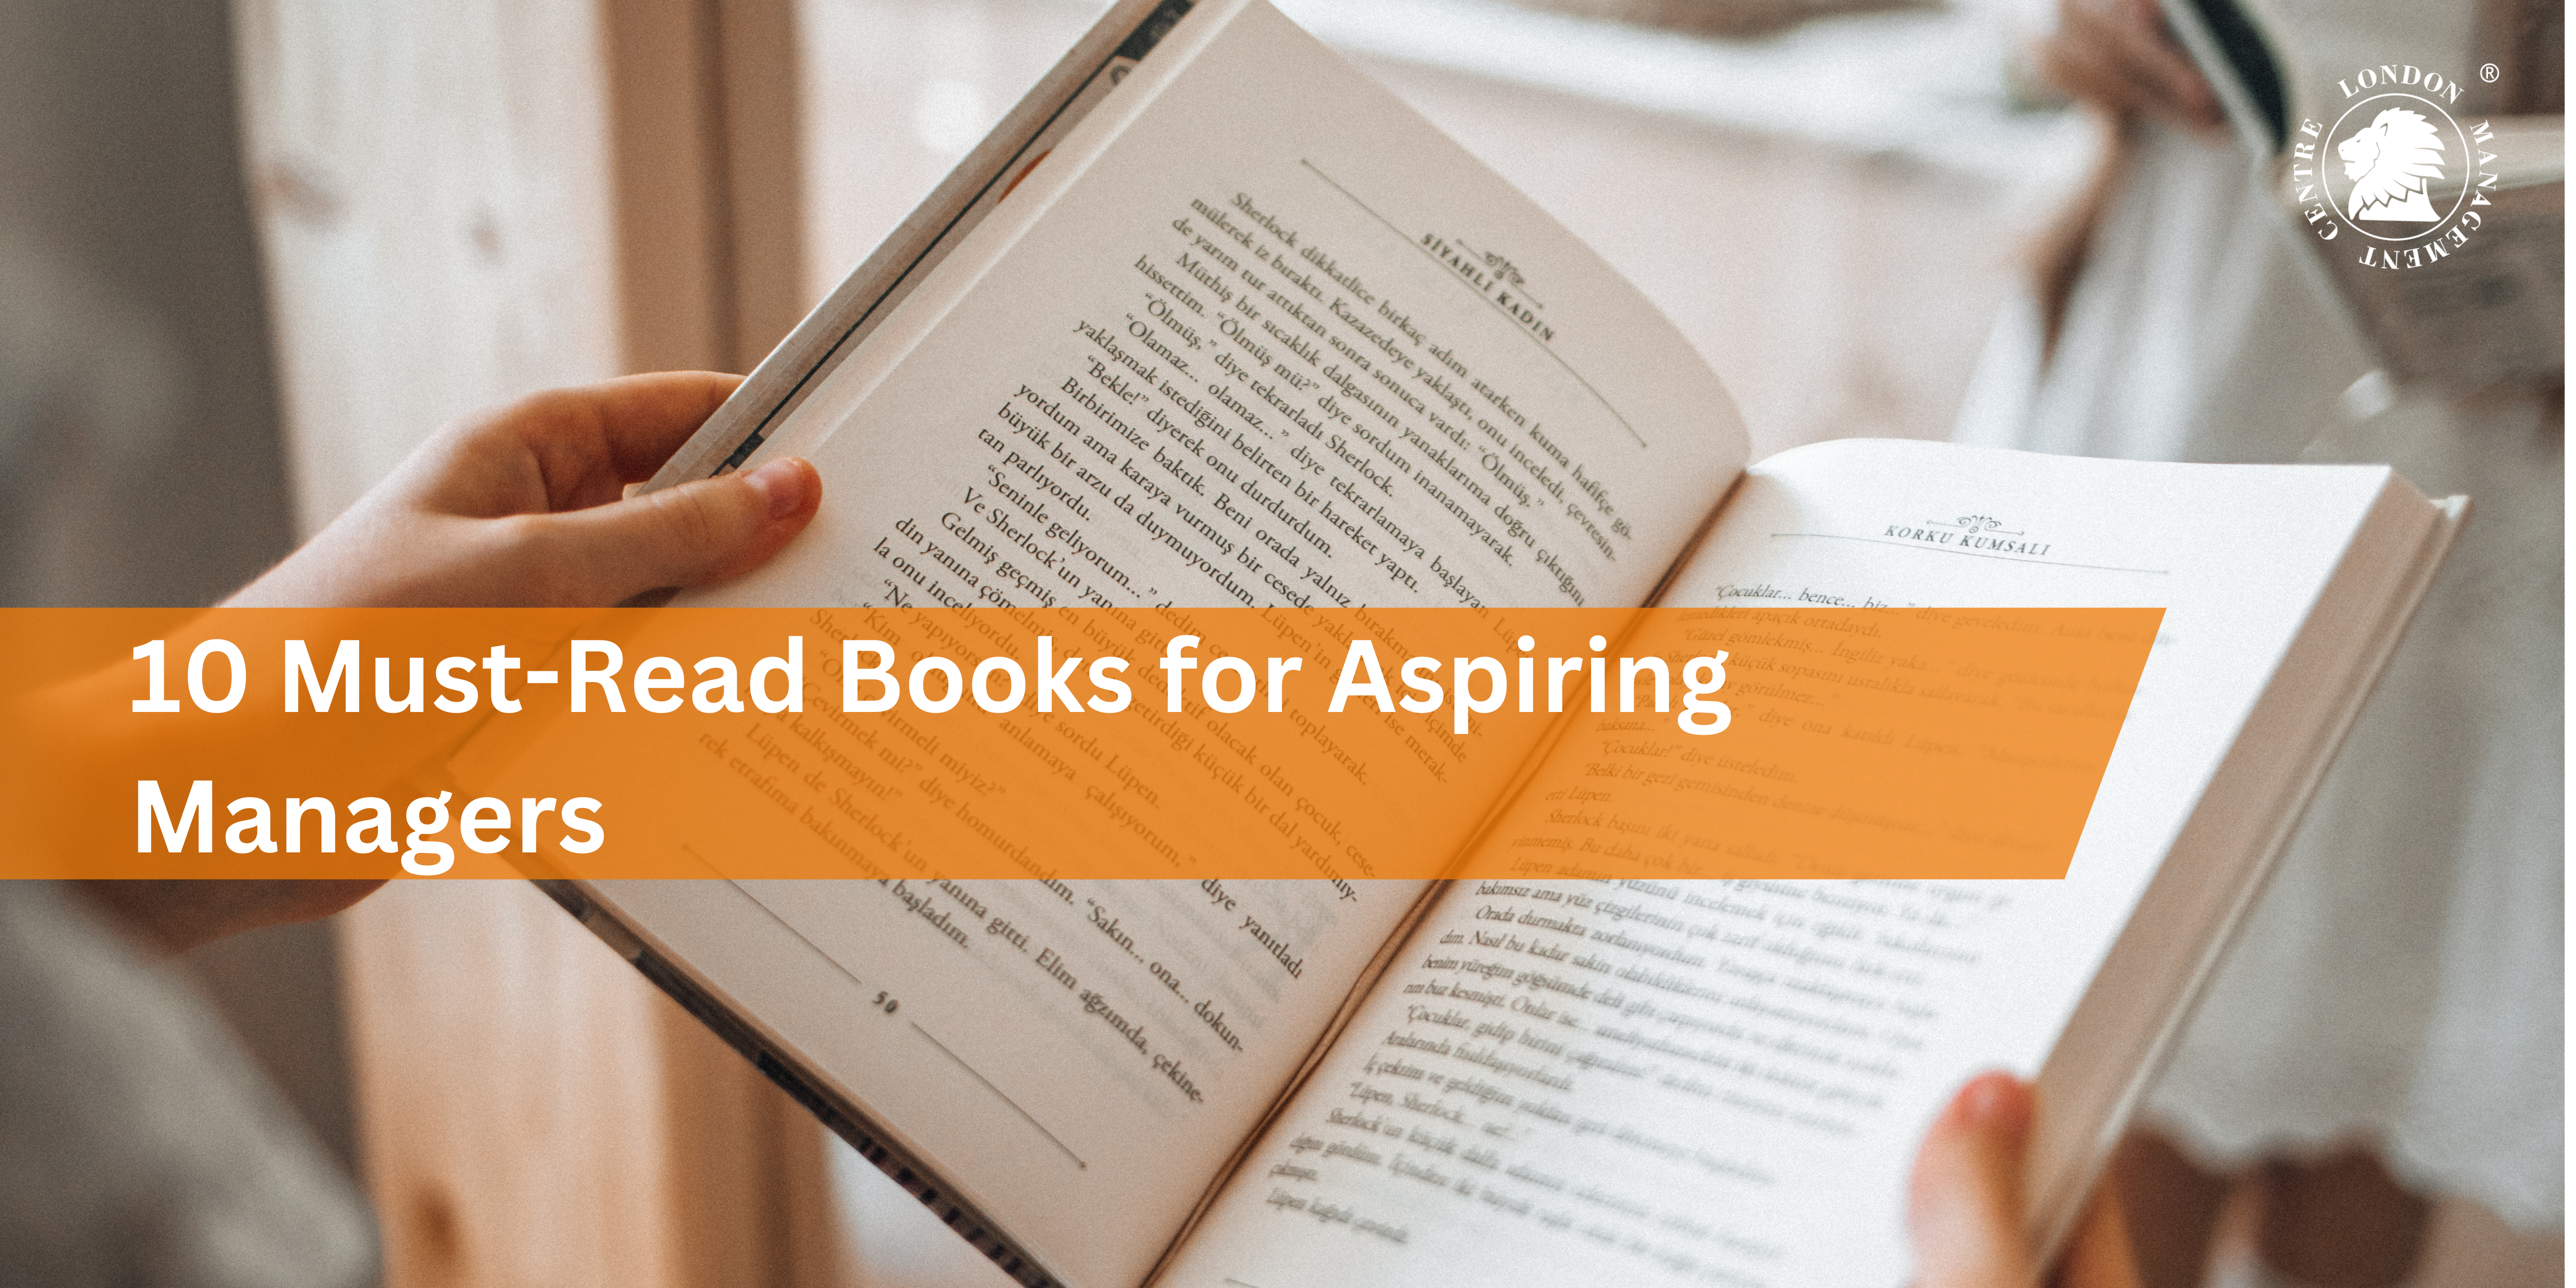 10 Must-Read Books for Aspiring Managers